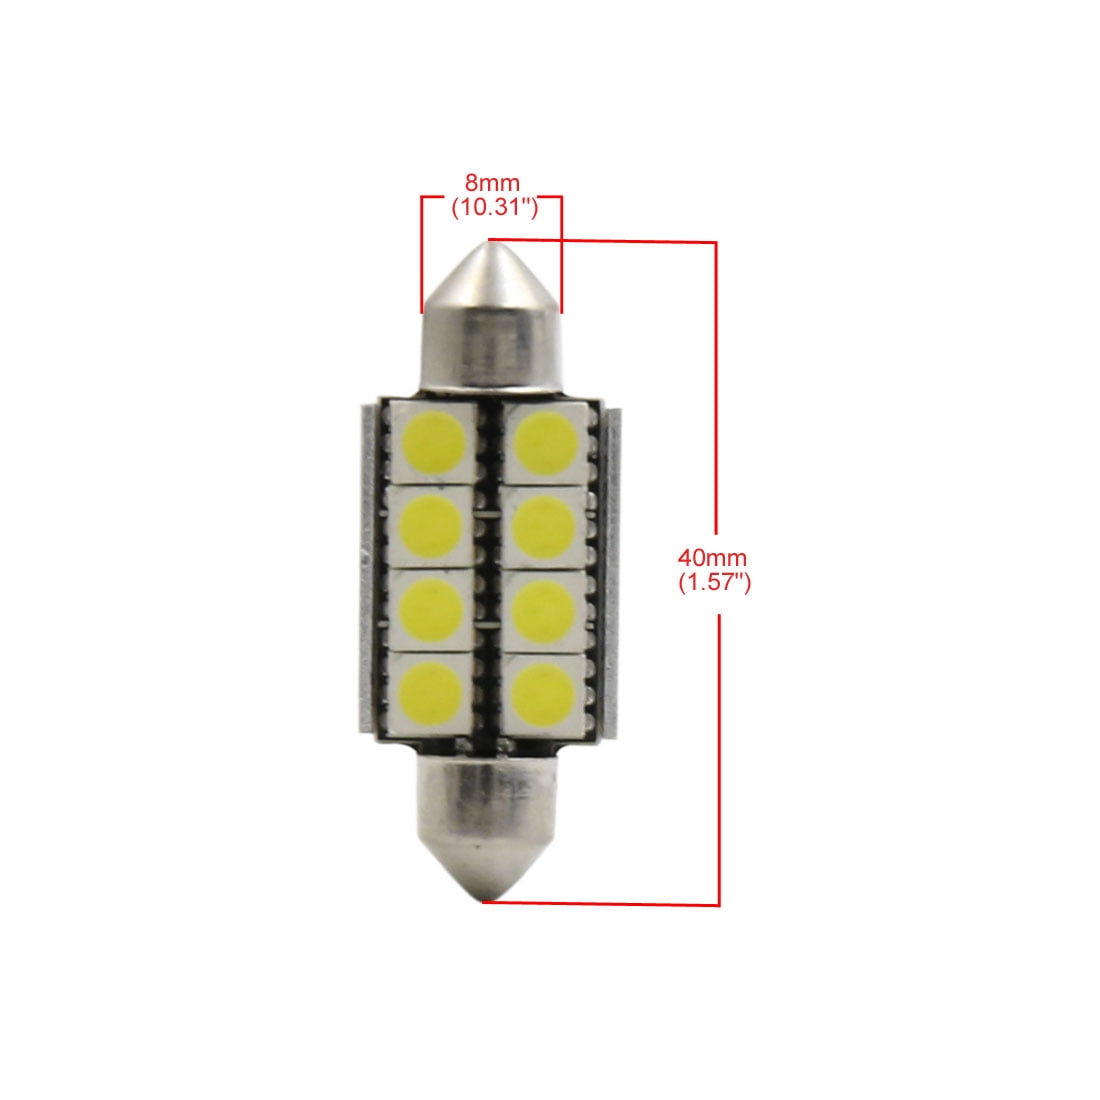 Sourcingmap 2Pcs 40mm Cool White 8-5050-SMD LED Festoon Dome Map Light Bulb for Car Interior 